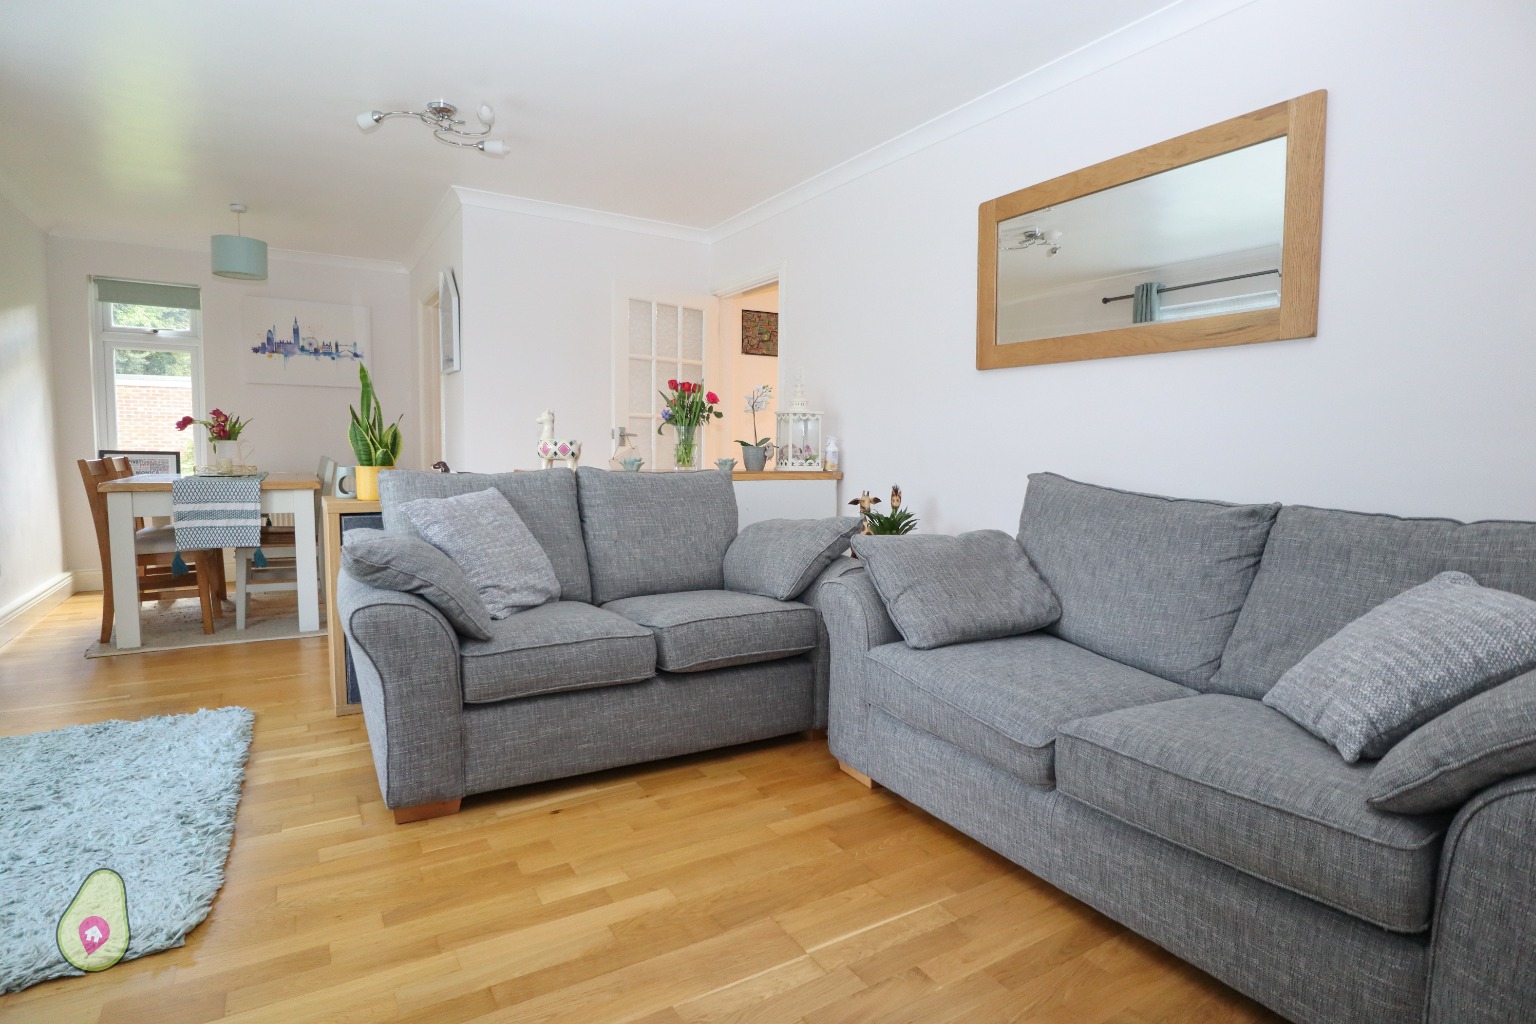 This lovely apartment is in an ultra convenient location, being a very short walk to the High Street, bus stops and other amenities.  There a two double bedrooms, a large living/dining room, along with a kitchen, luxury bathroom/utility room and another separate cloakroom, plus a garage!